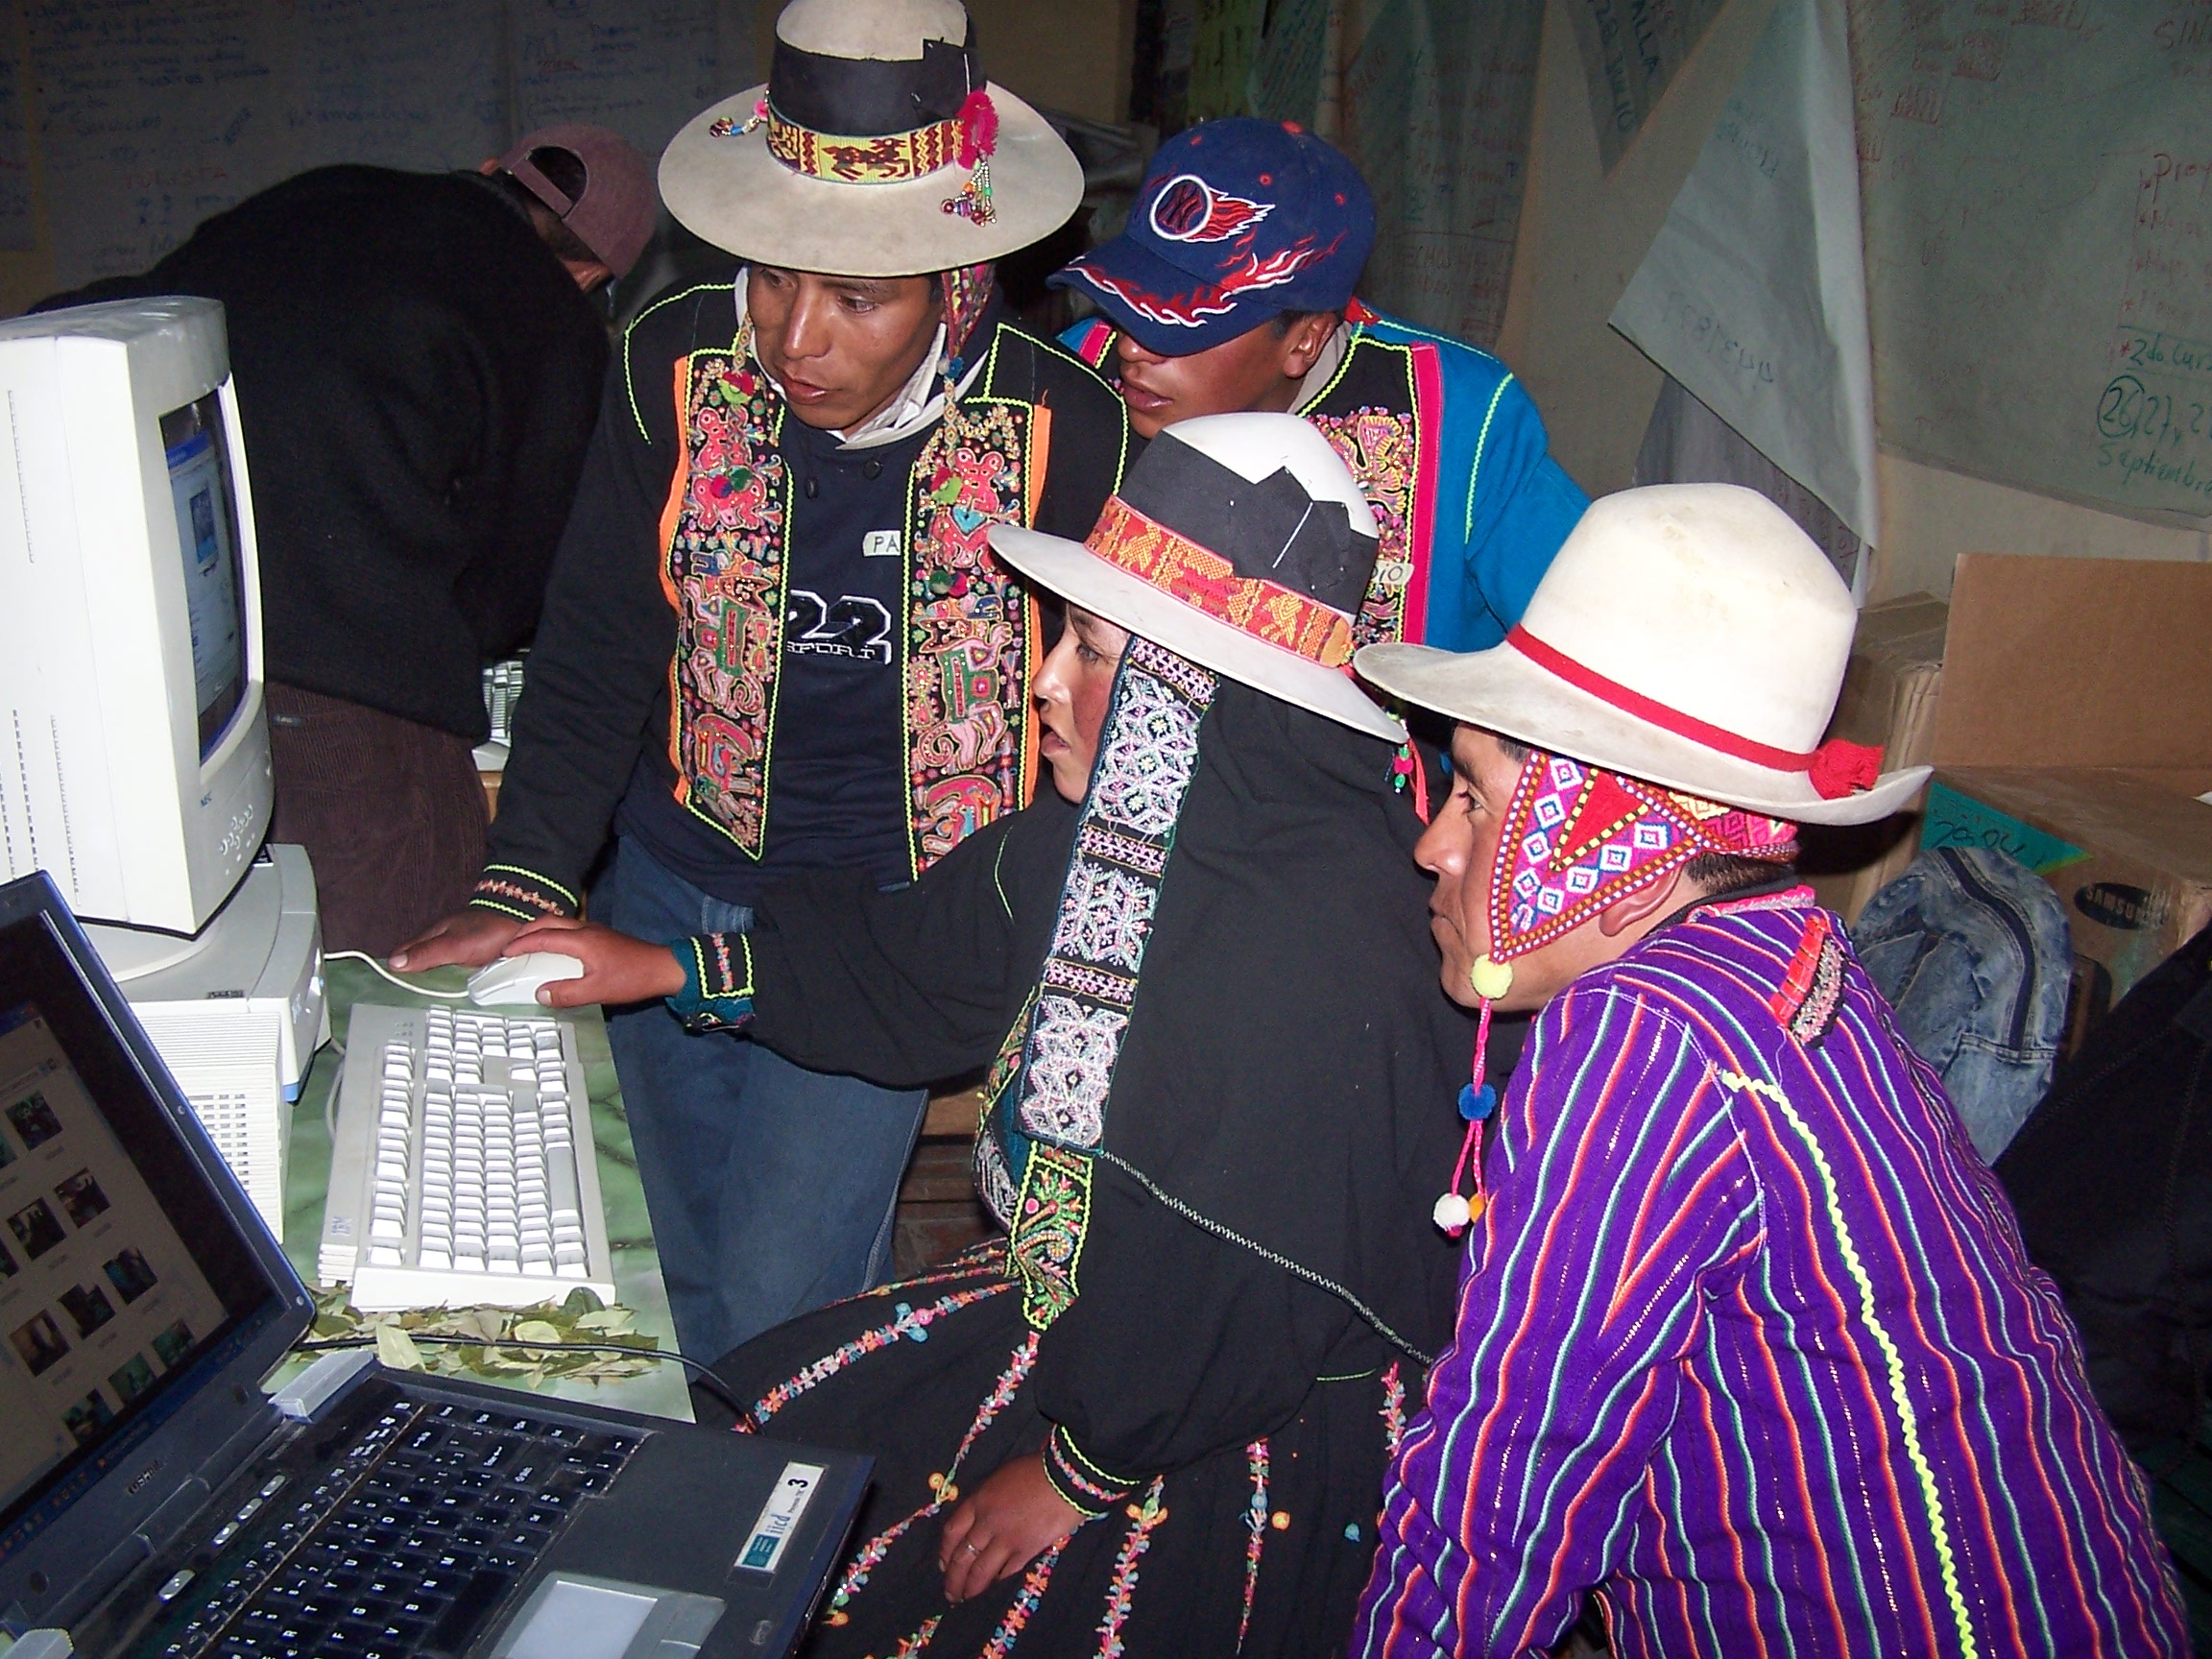 ICT tools help indigenous community in Bolivia